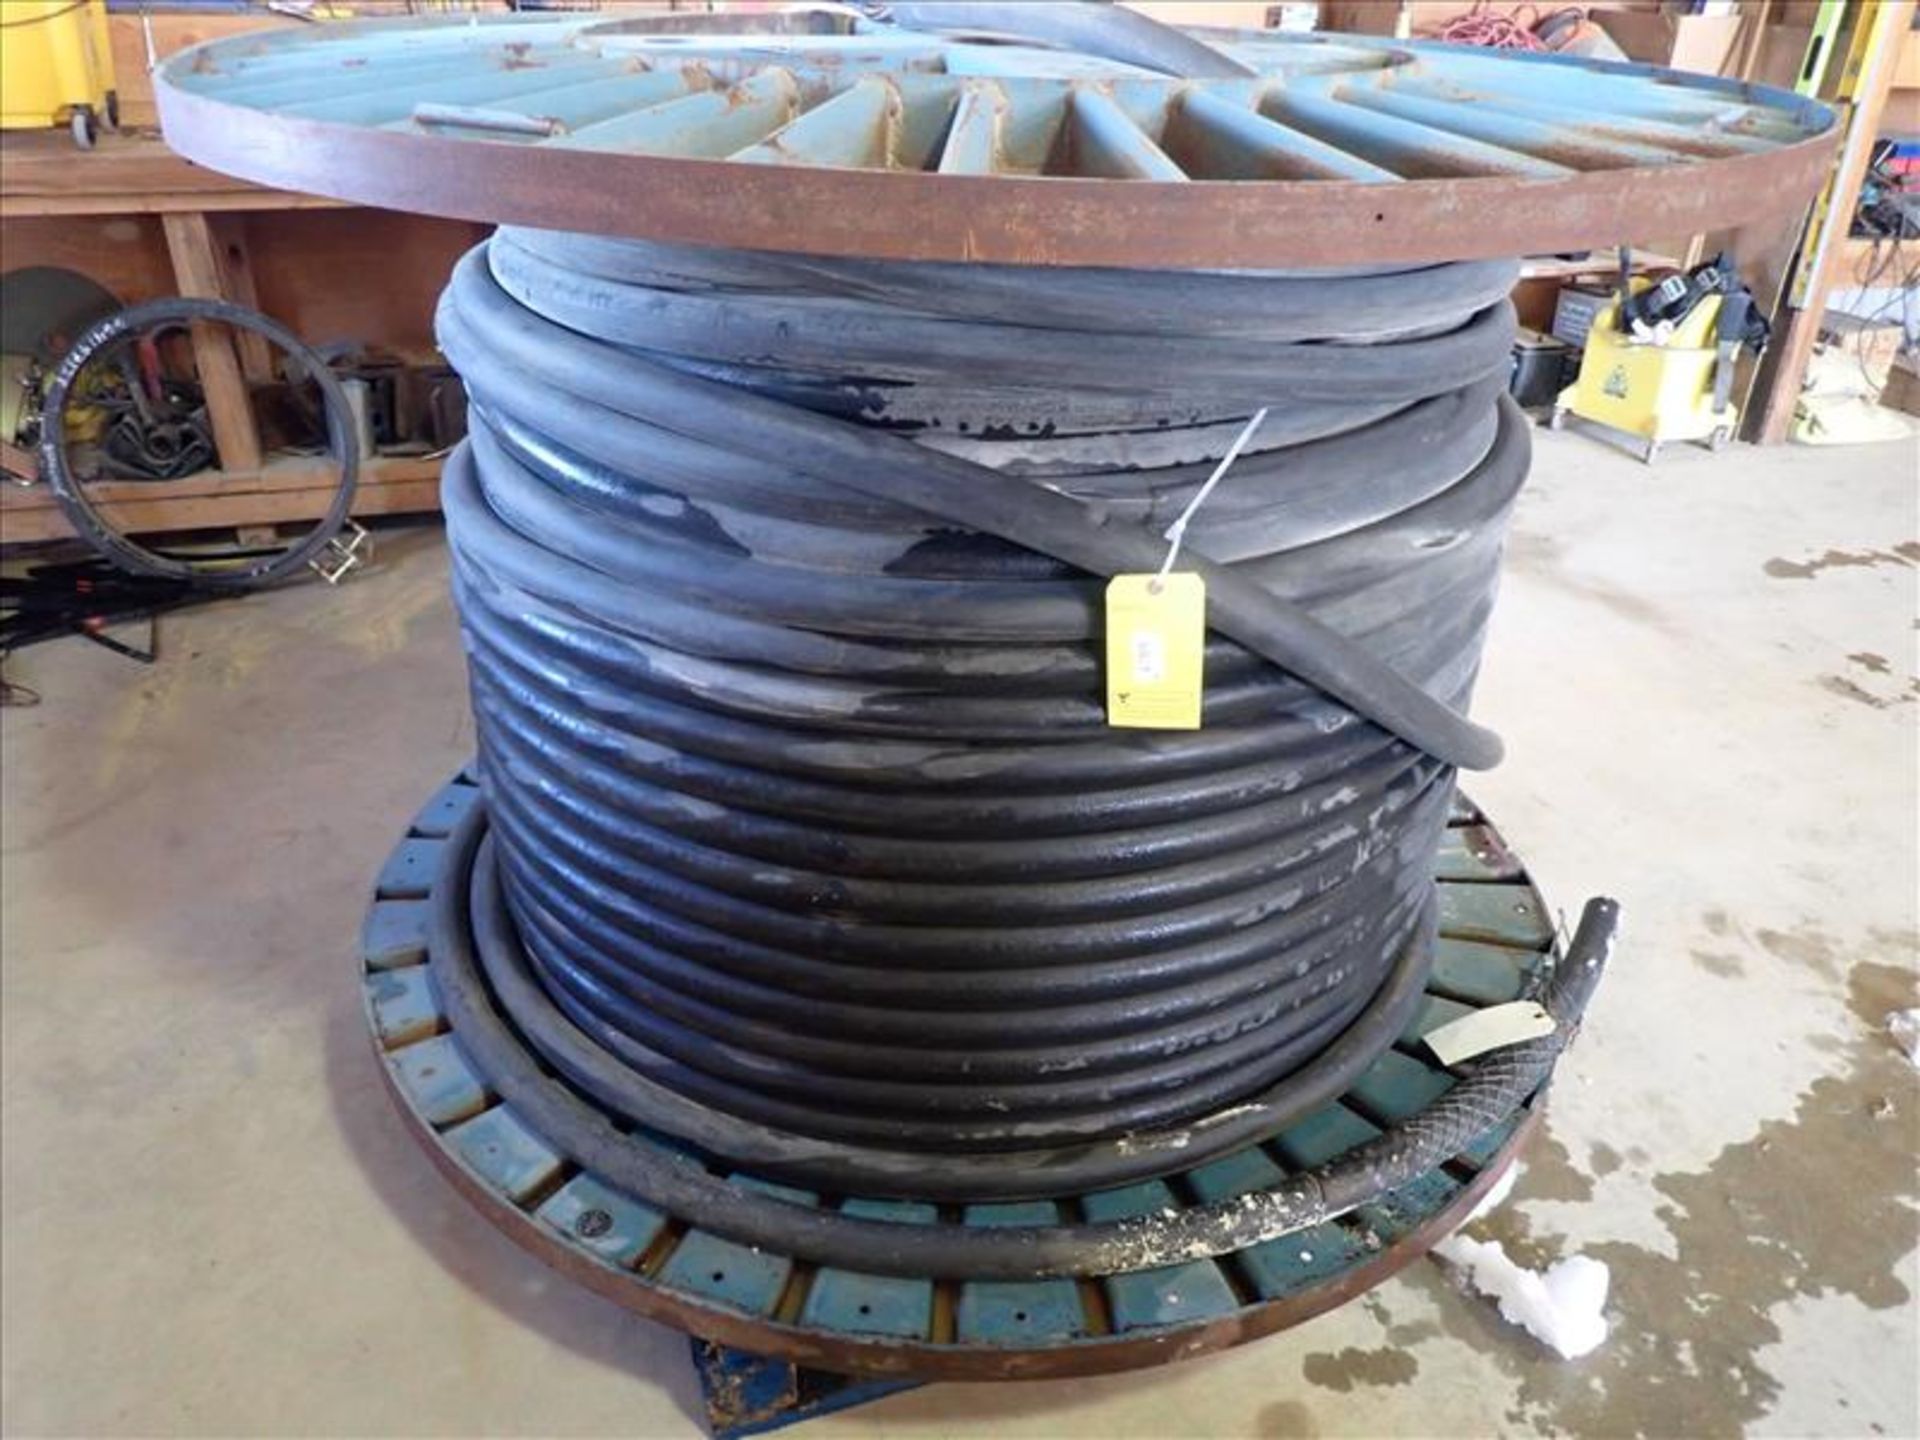 Partial Cable Reel; General Cable Anaconda Brand 2/0 8/C Type SHD-GC 2000V (-50C) FT1 FT5 CSA